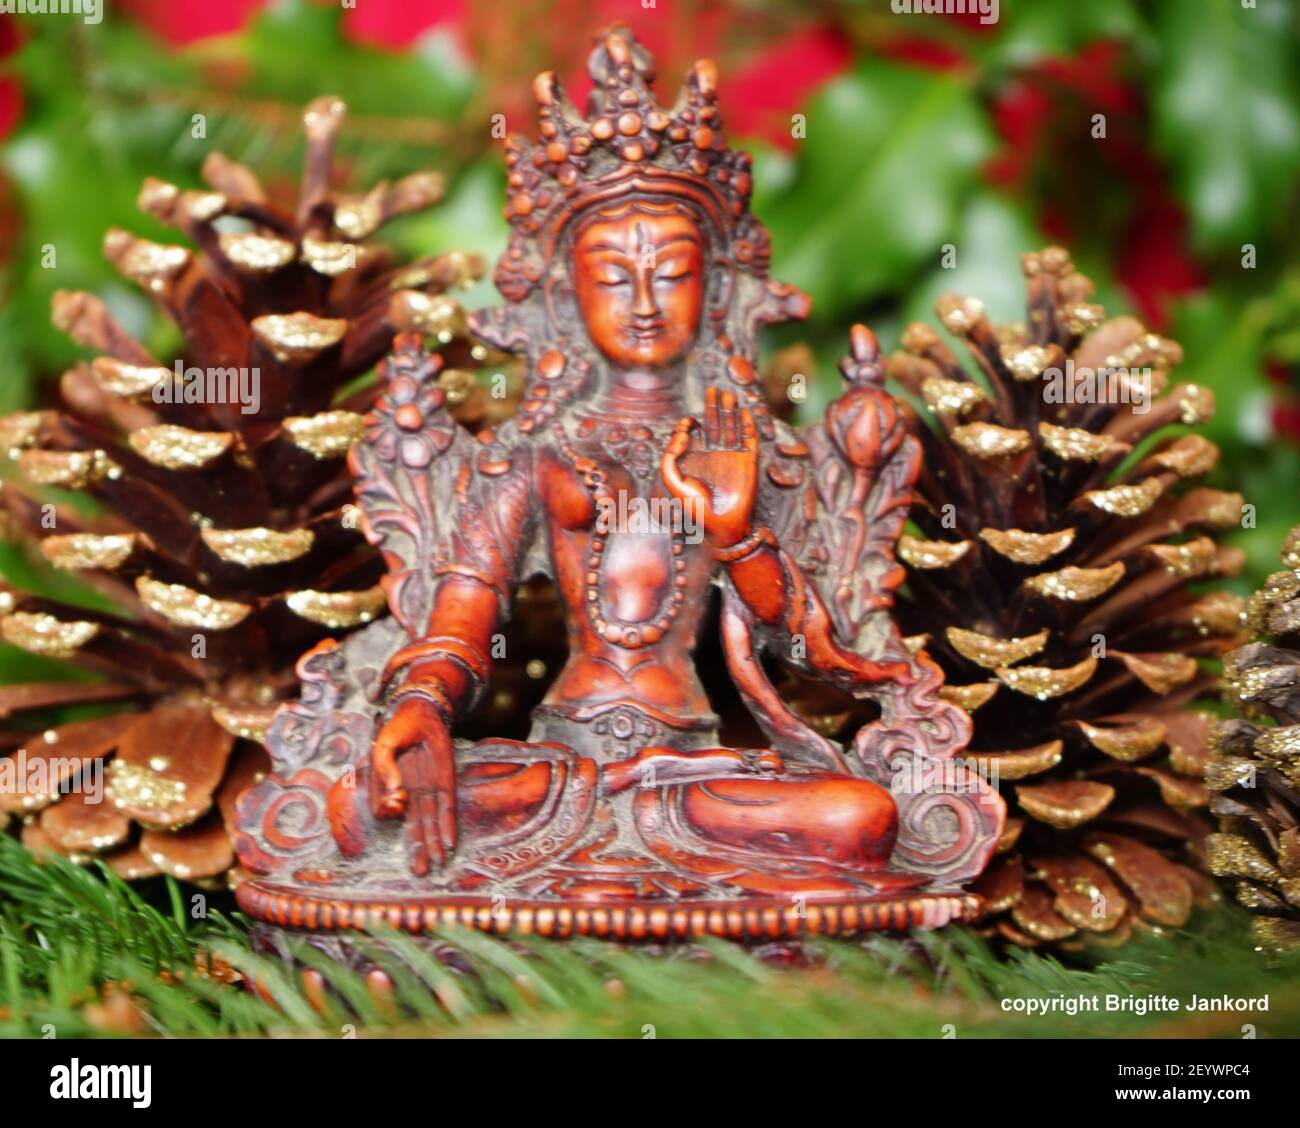 the Blessed Red Tara takes part in the winter solstice ceremony called Christmas in the Western atmosphere Stock Photo